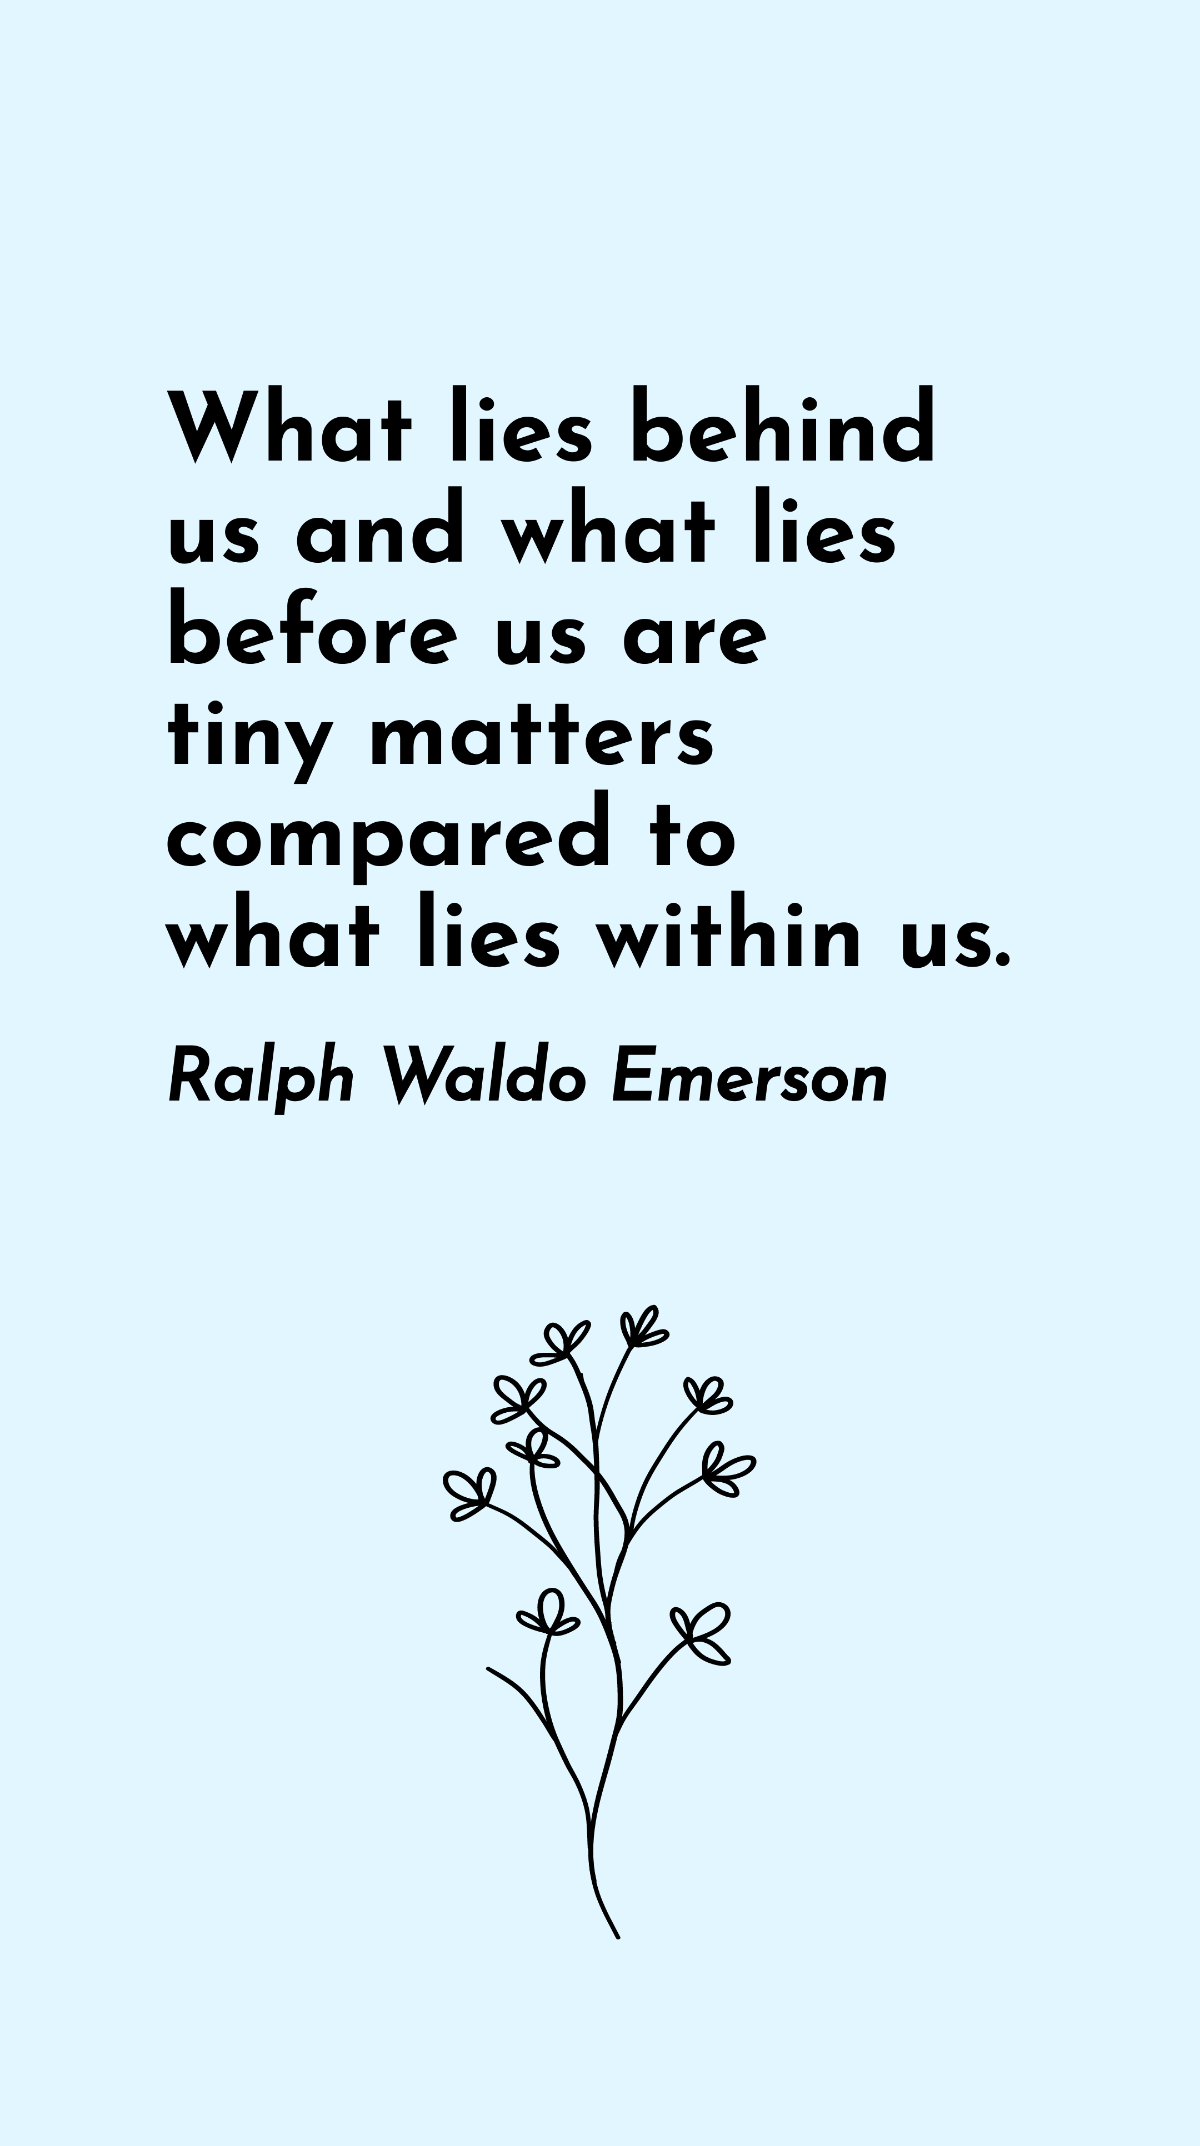 Free Ralph Waldo Emerson - What lies behind us and what lies before us are tiny matters compared to what lies within us. Template